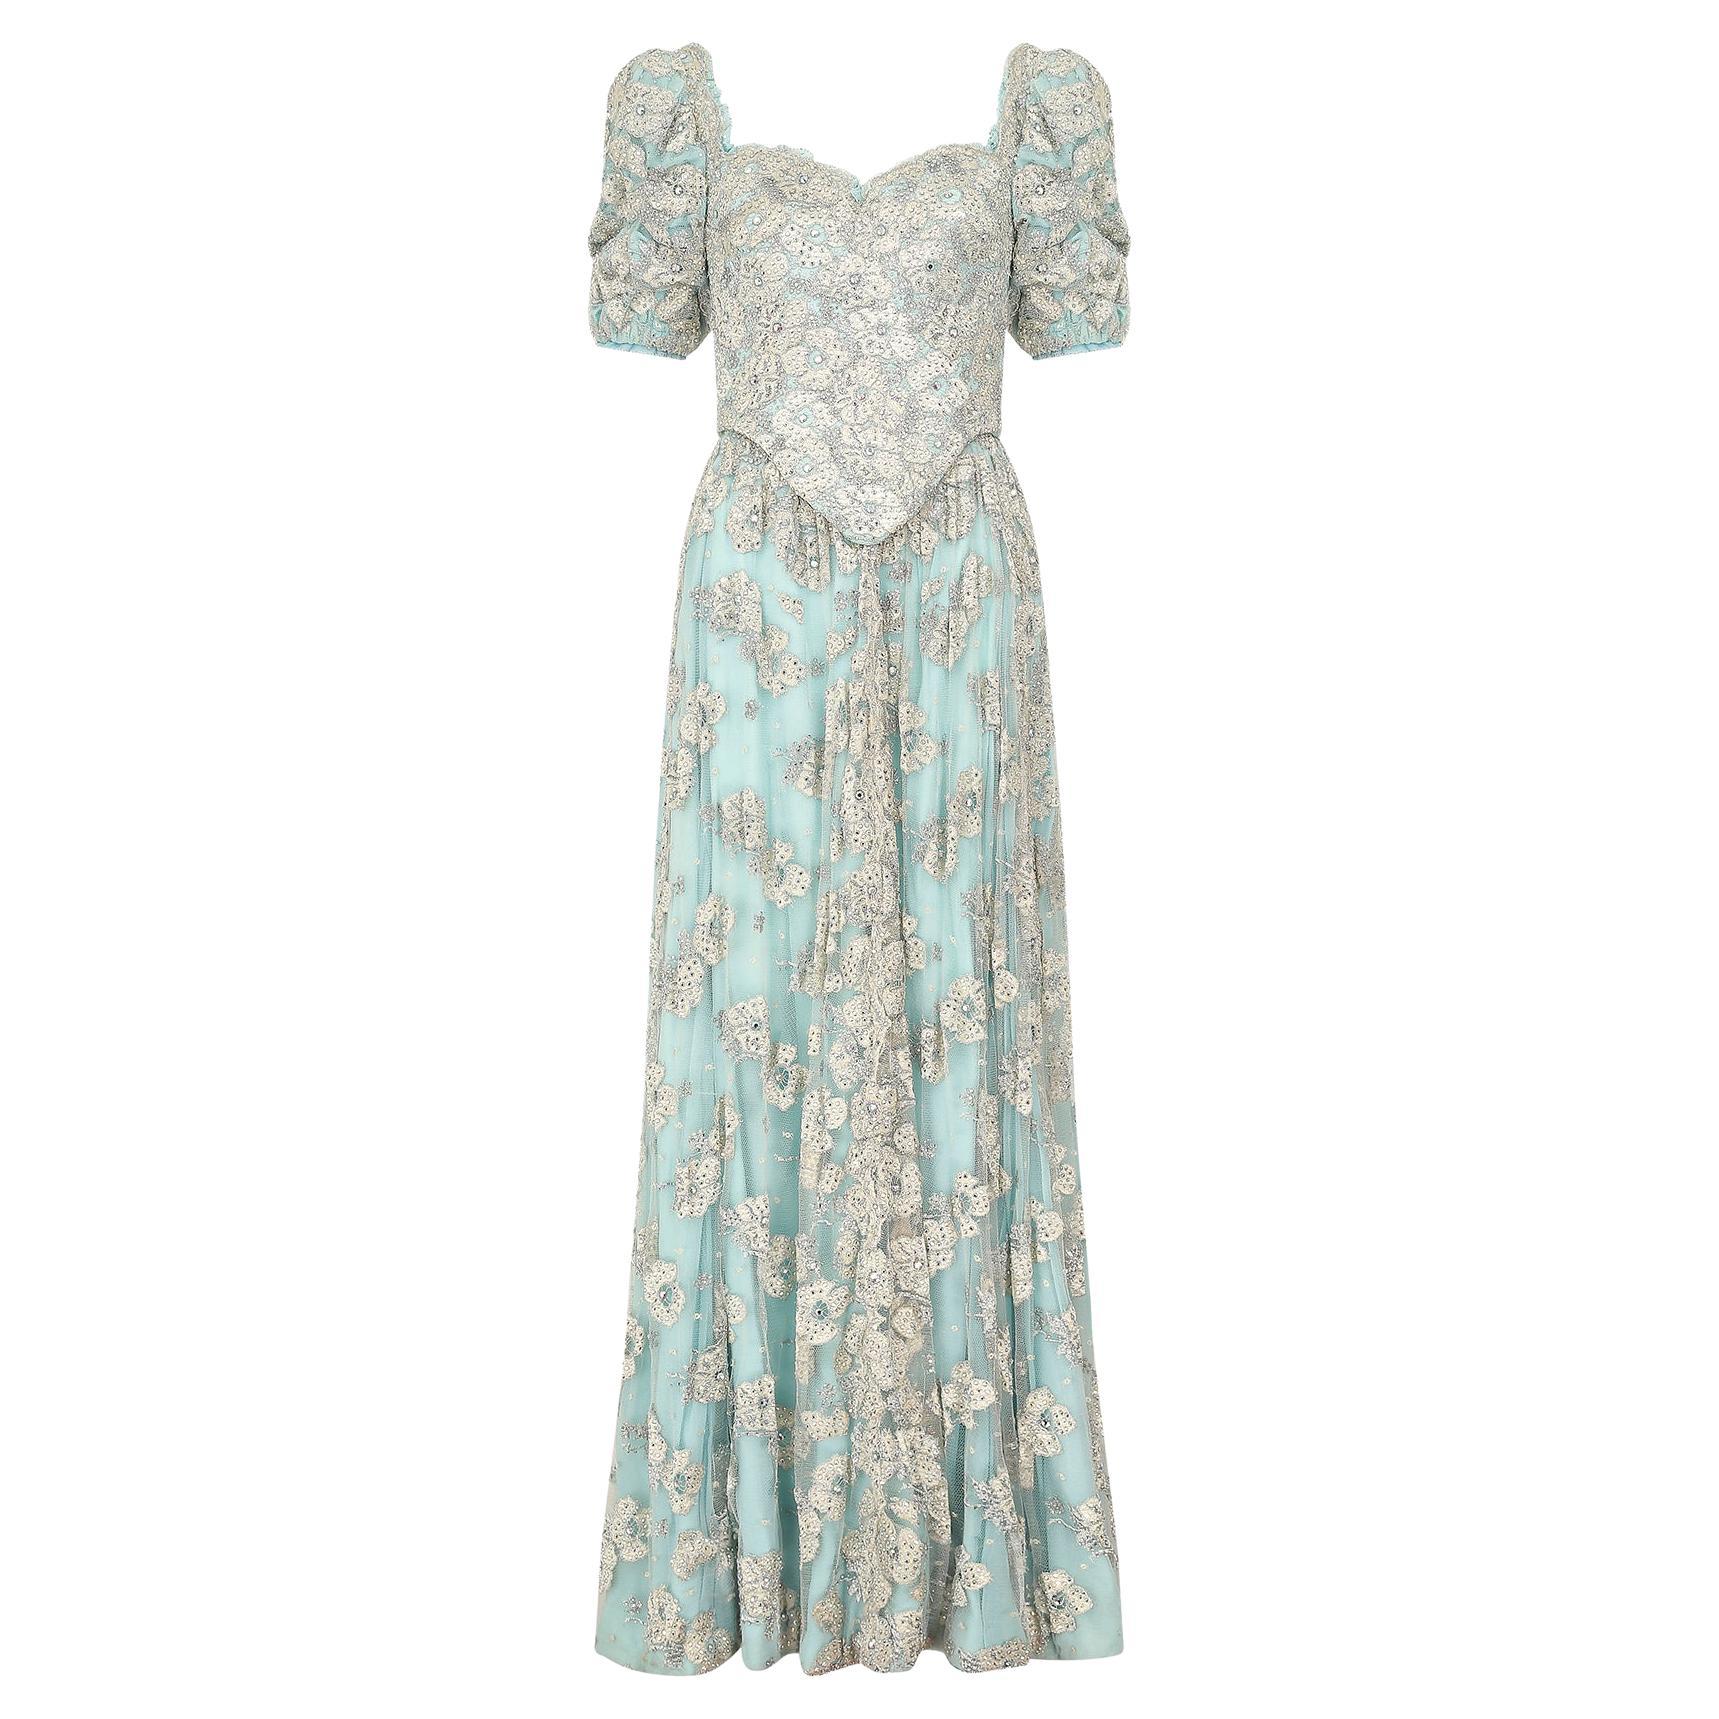 1990s Bespoke Embellished Lace and Crystal Turquoise Dress For Sale